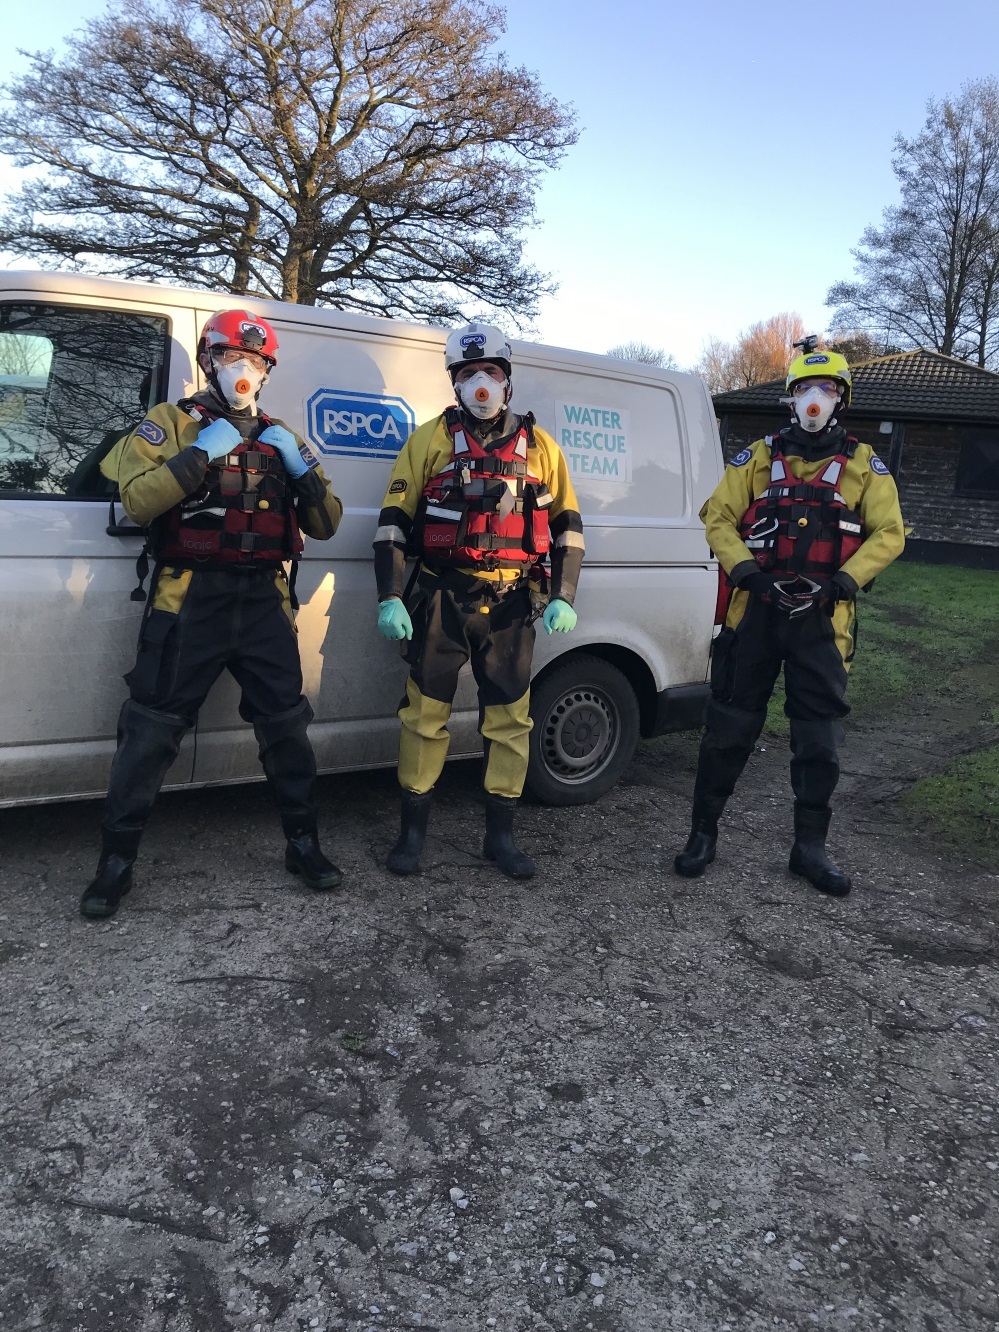 RSPCA water rescue team is making regular visits to Winsford Marina